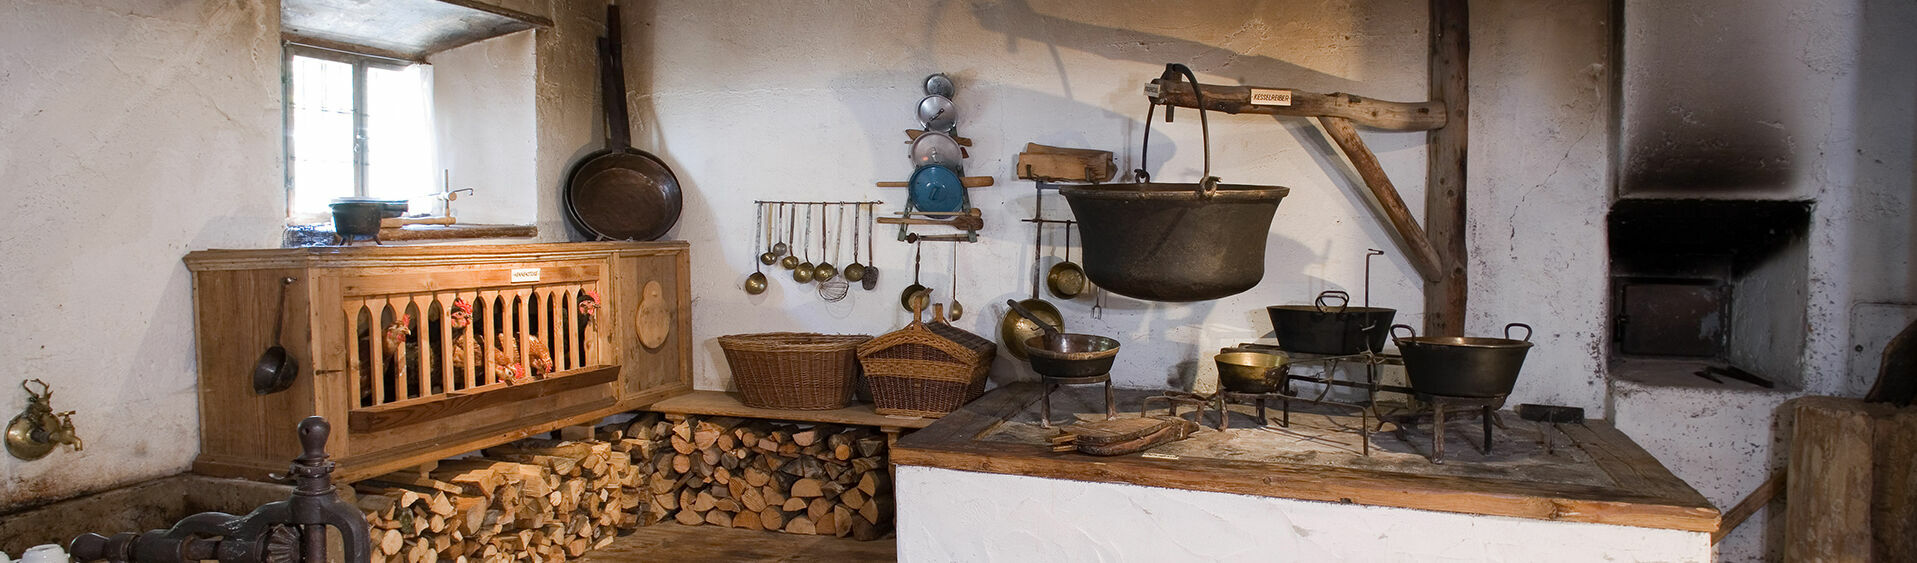 The old open-fire kitchen at the museum Sixenhof of local history in Achenkirch am Achensee.